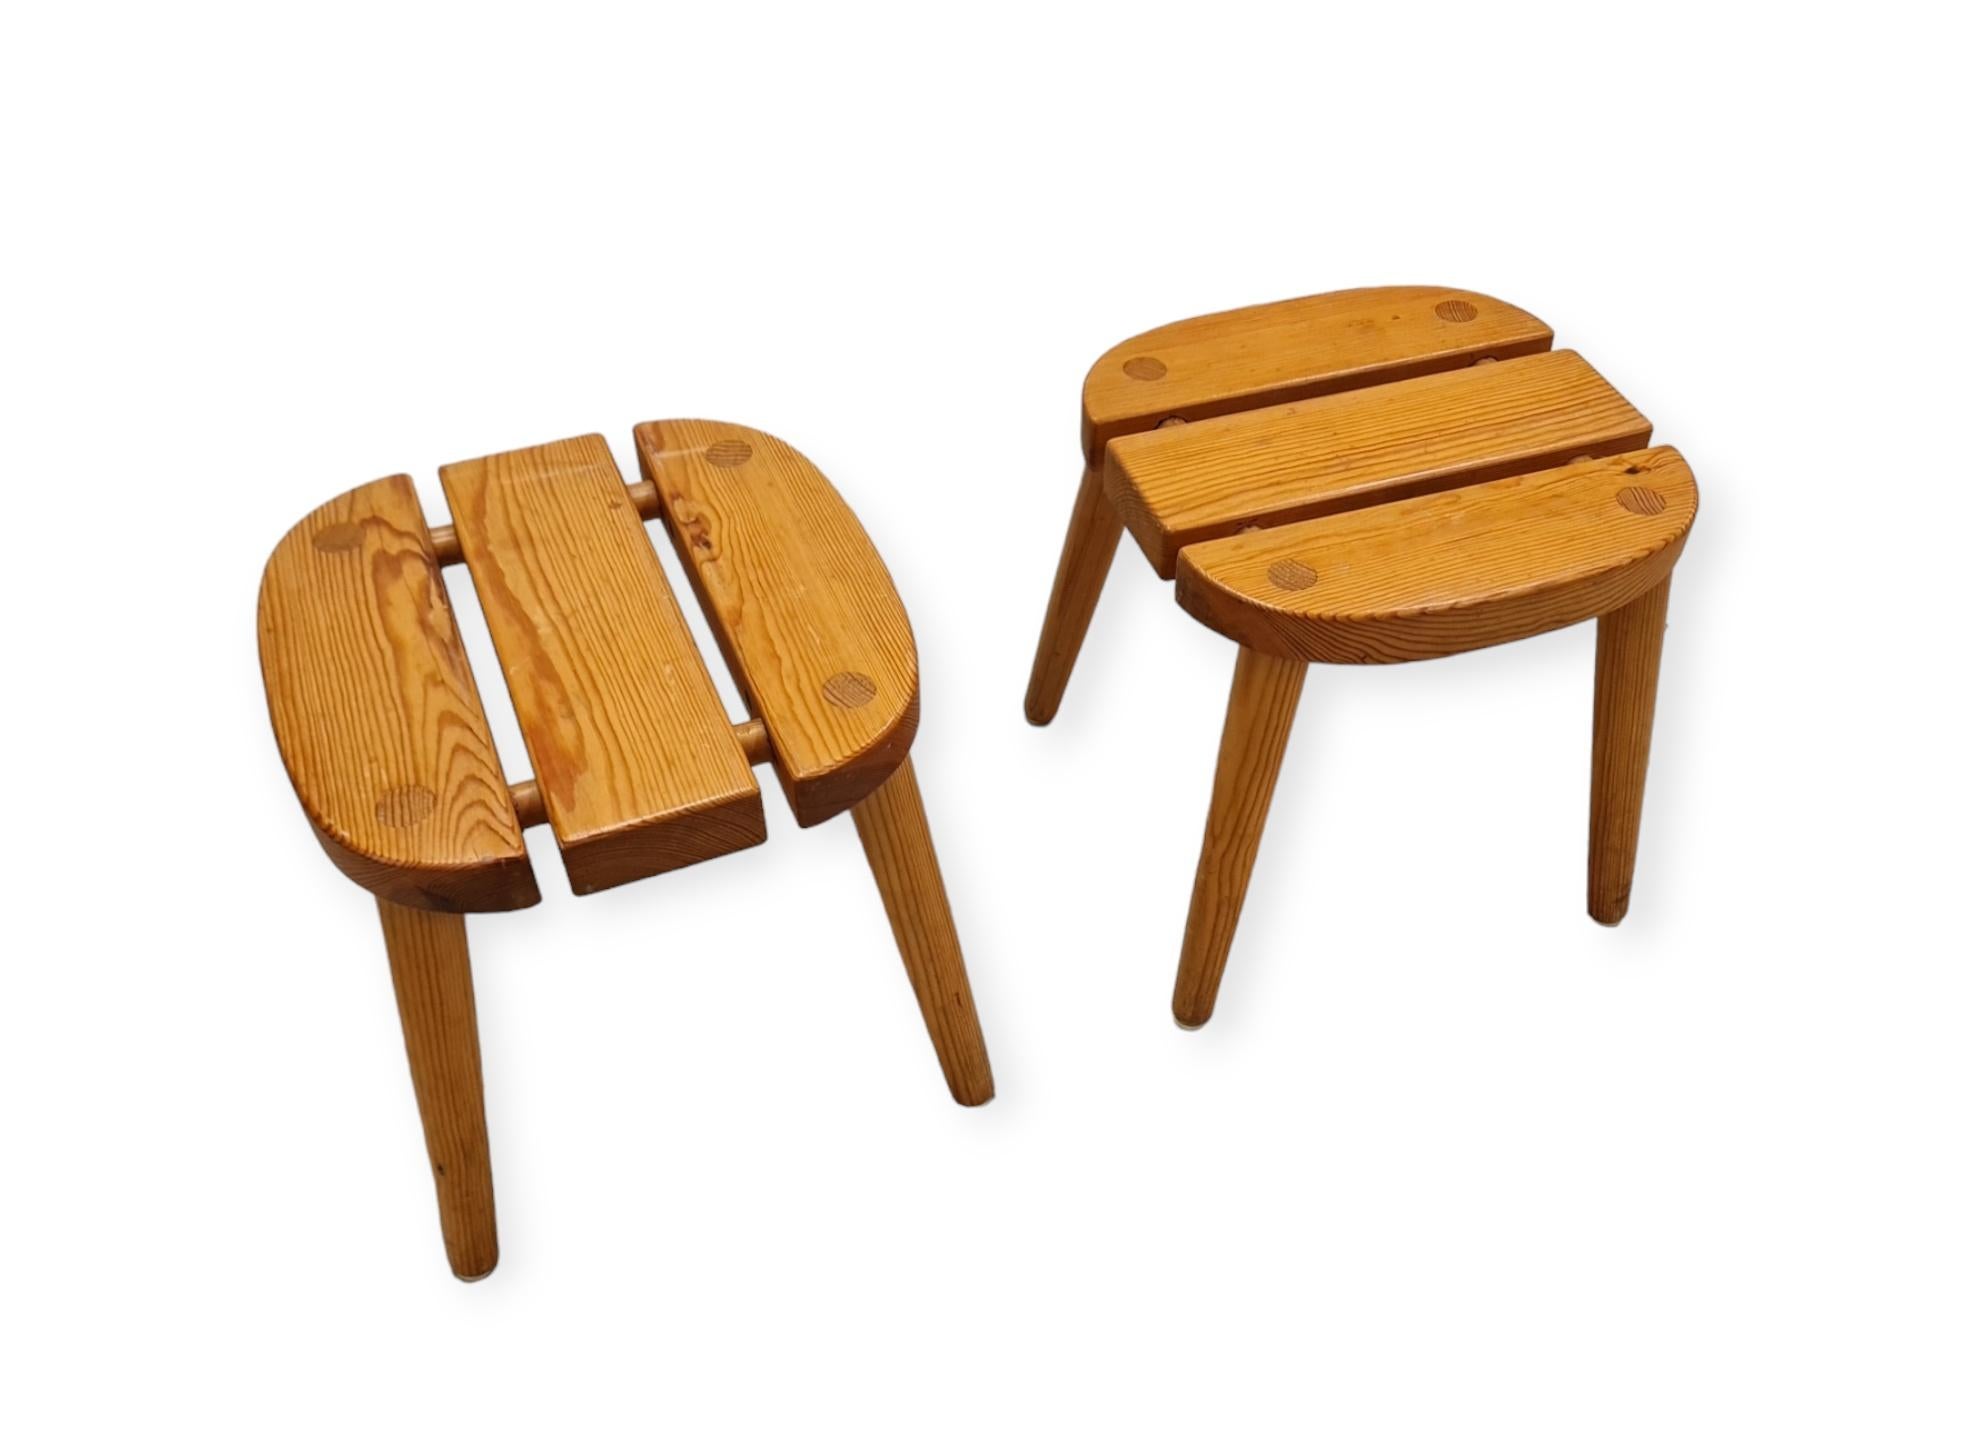 Pine Pair of Finnish Sauna Stools, 1970s For Sale